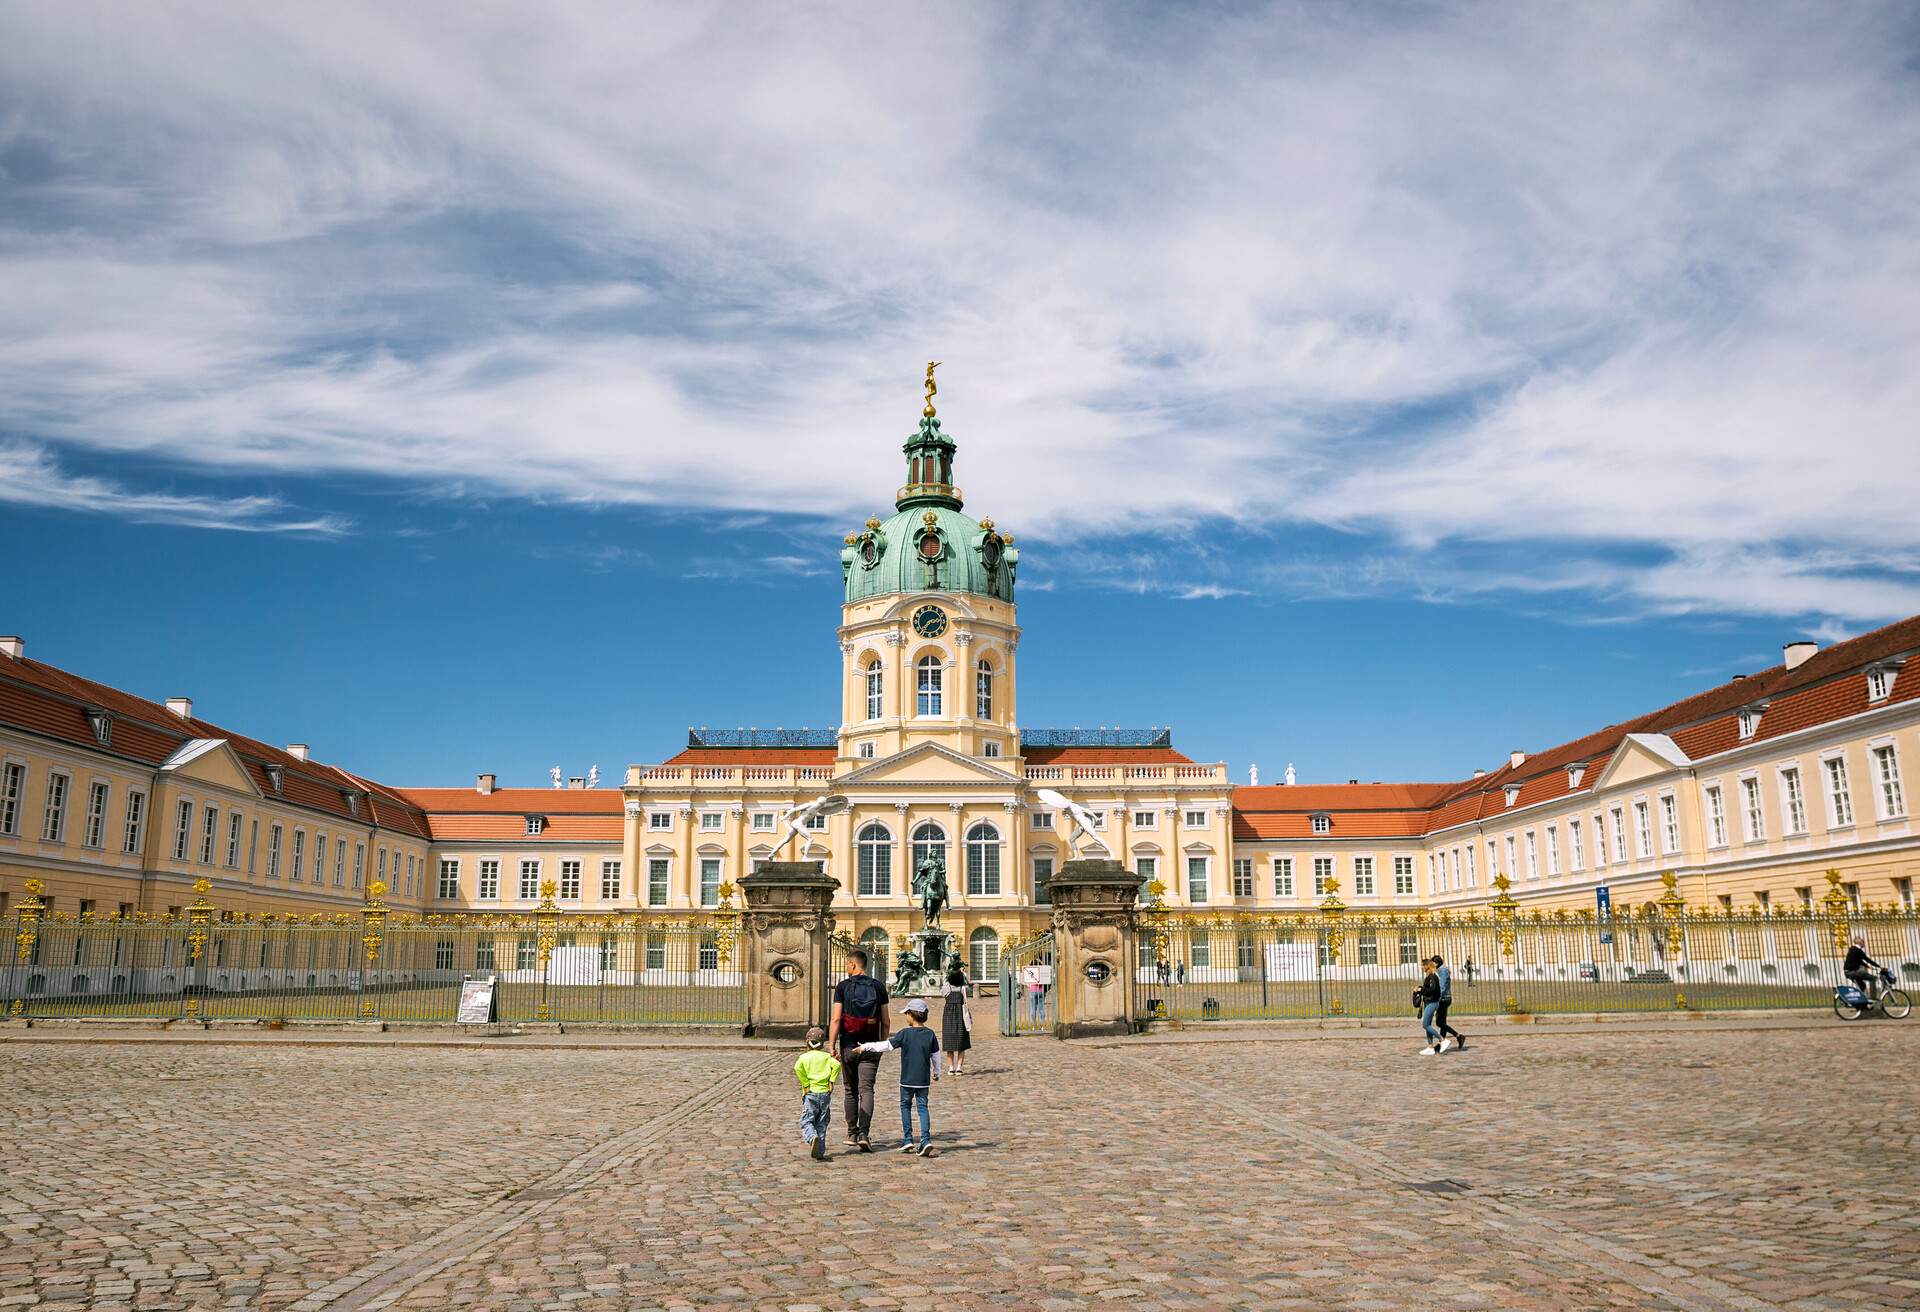 People walk towards the baroque architectural palace of the symmetrical Schloss Charlottenburg in Berlin, Germany. 